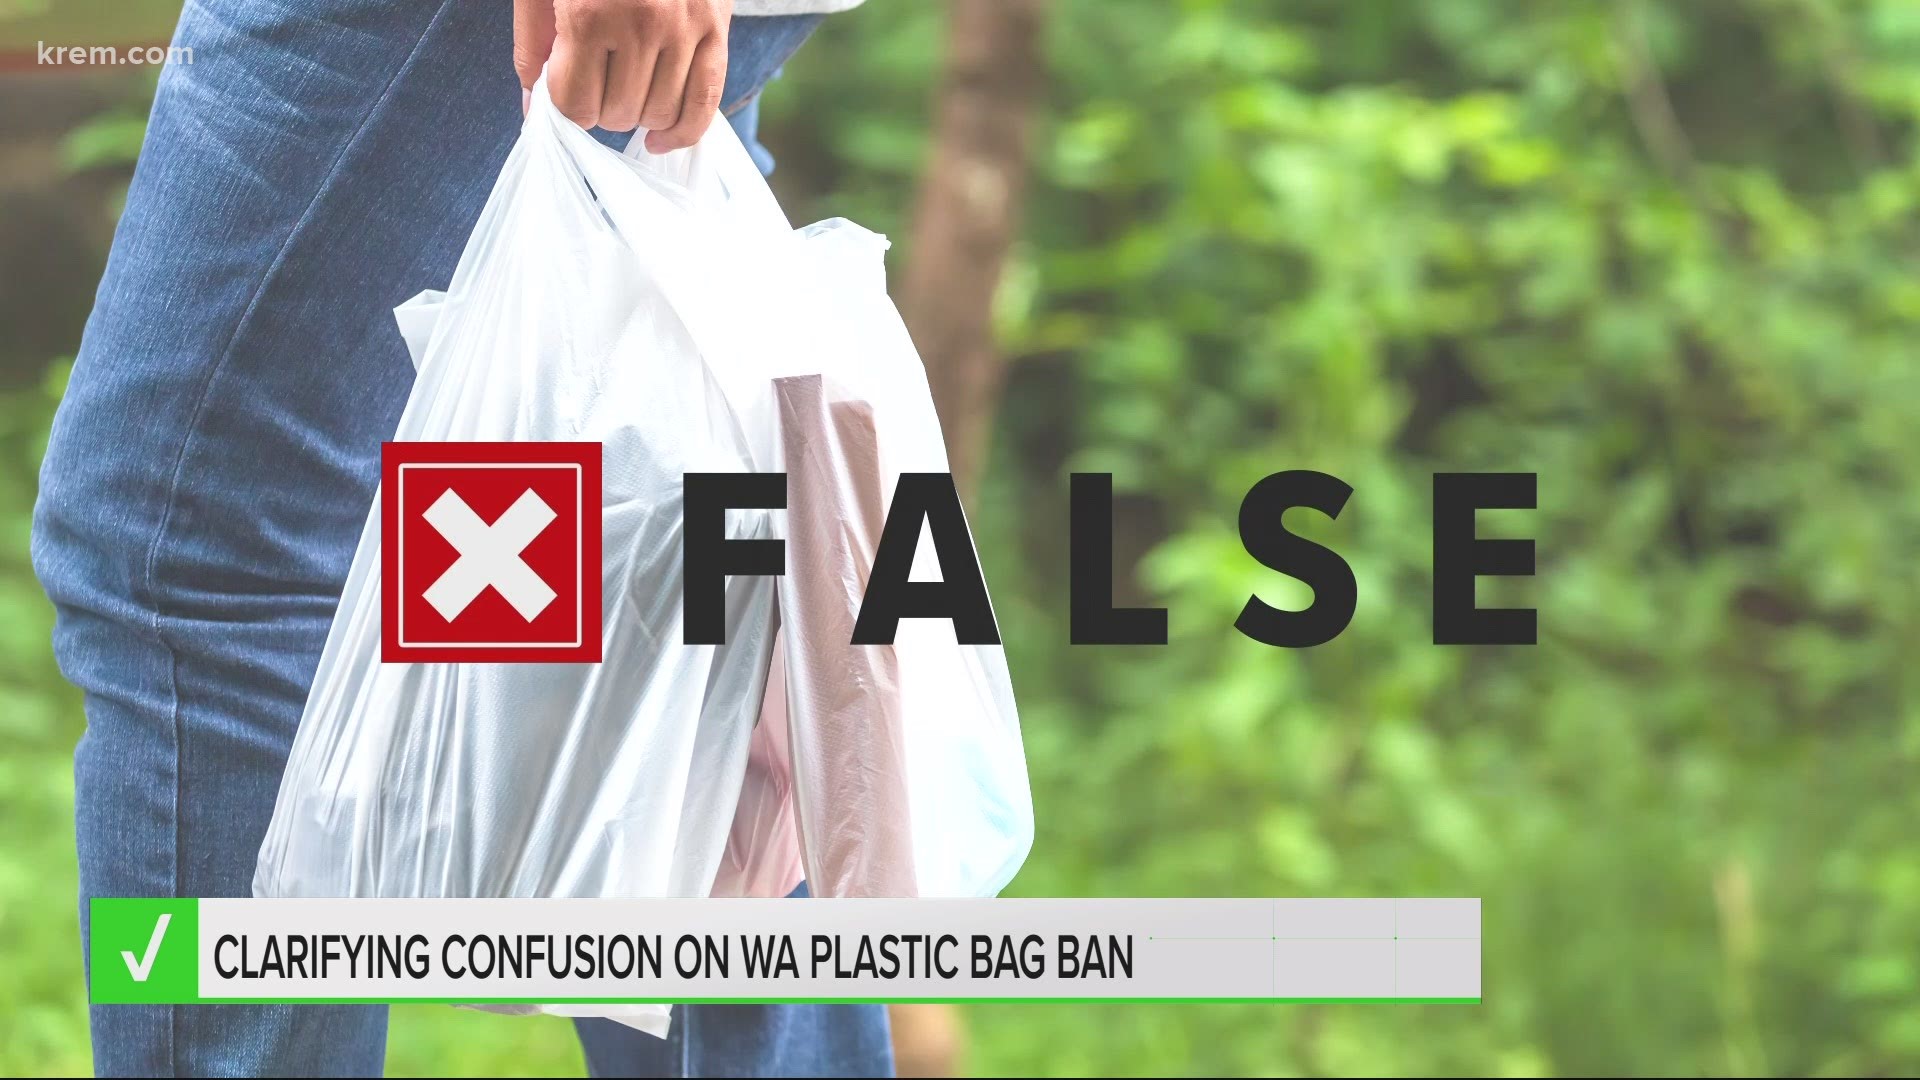 The law bans retailers from using single-use plastic bags. It would have started January 1st, but the governor put it on hold due to the coronavirus pandemic.